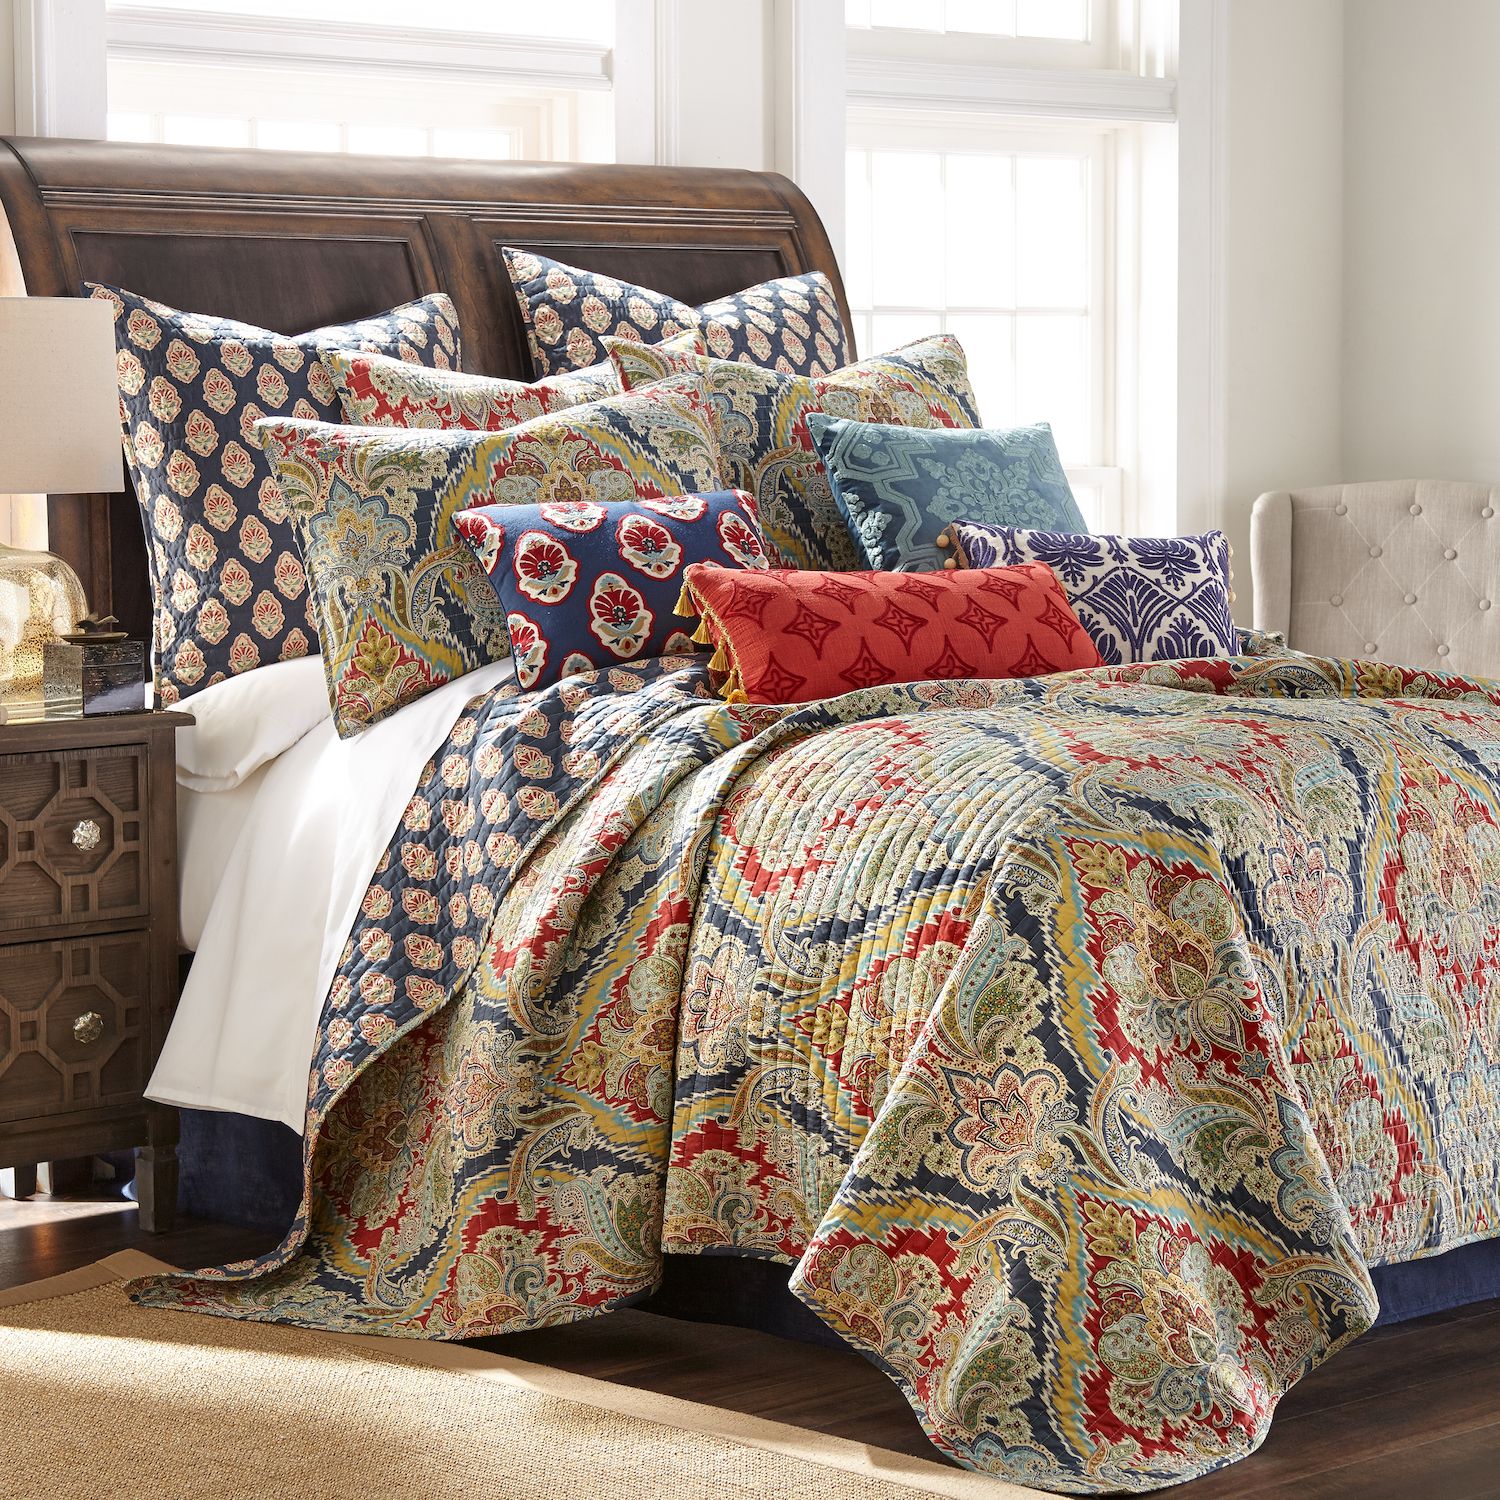 Image for Levtex Home Moreno Quilt Set and Shams at Kohl's.